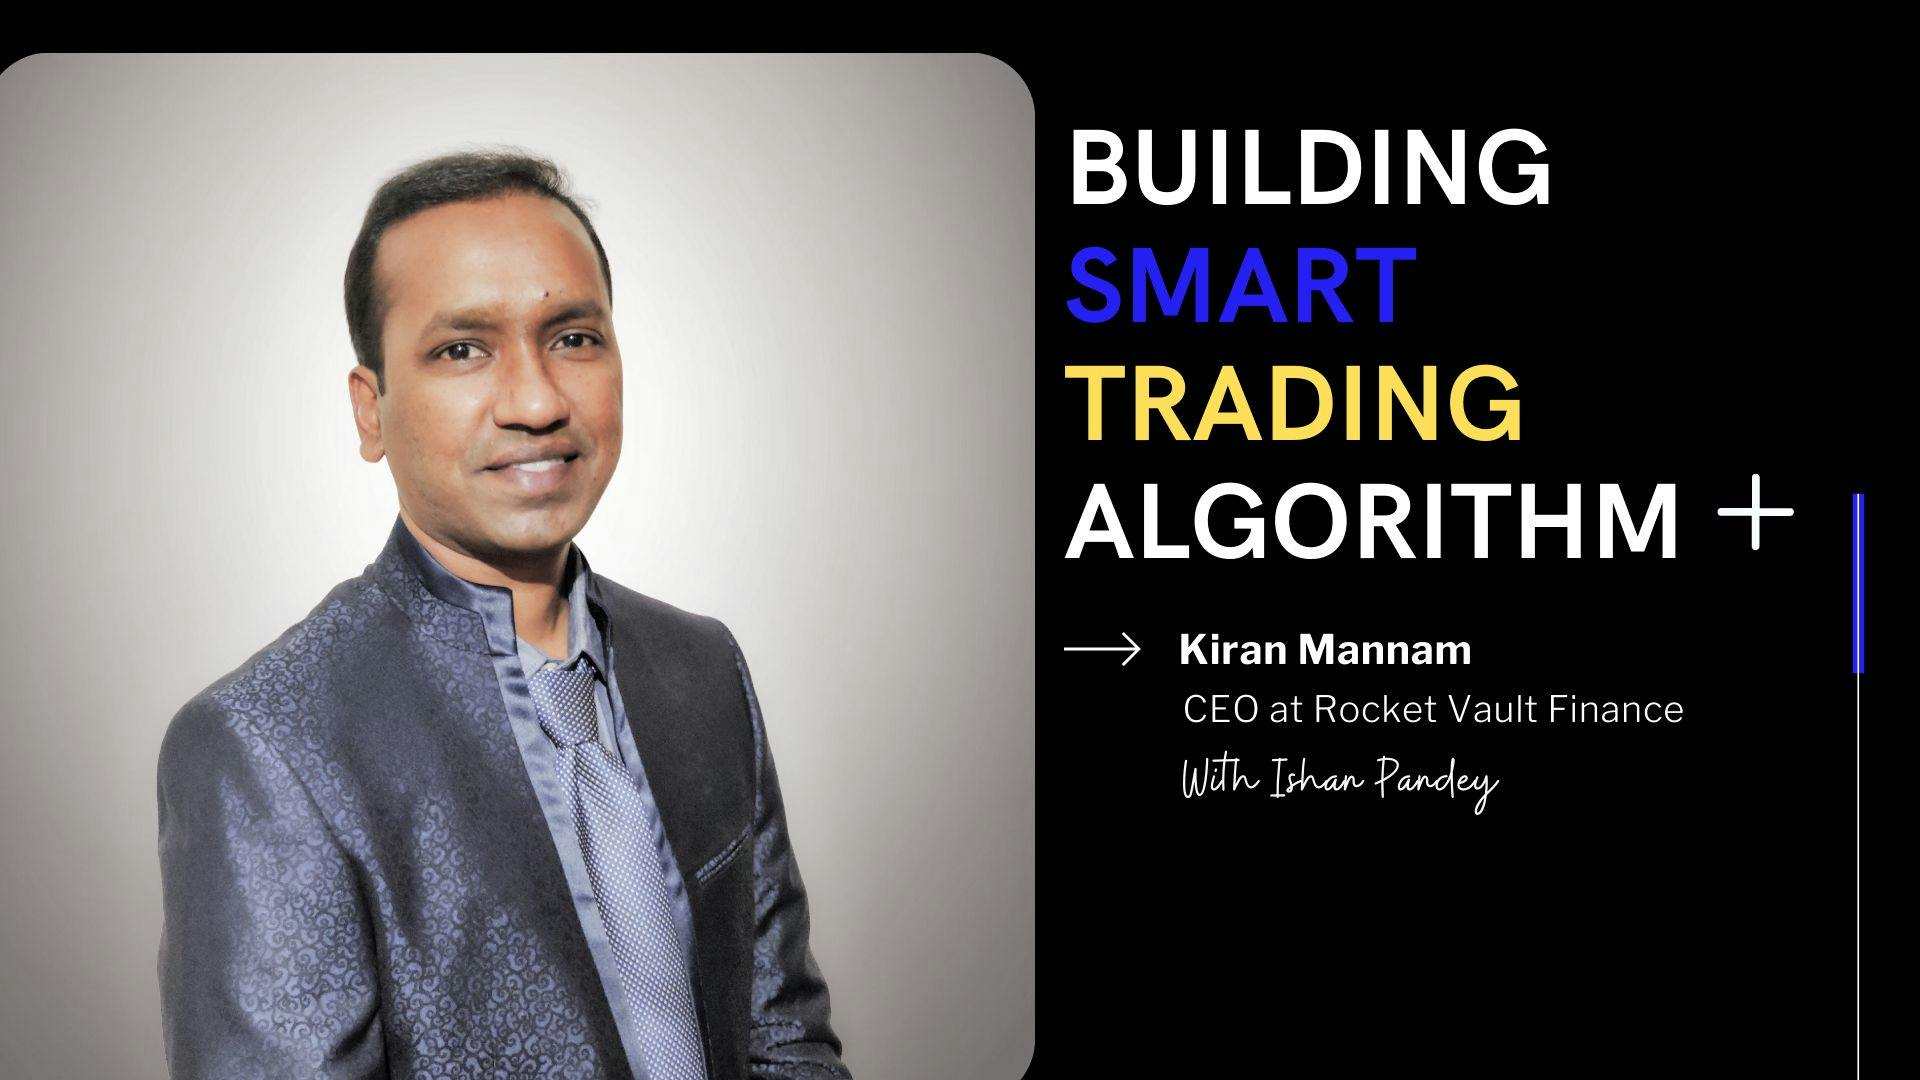 /building-ai-based-trading-algorithms-an-interview-with-kiran-mannam-ceo-at-rocket-vault-finance-te28338r feature image